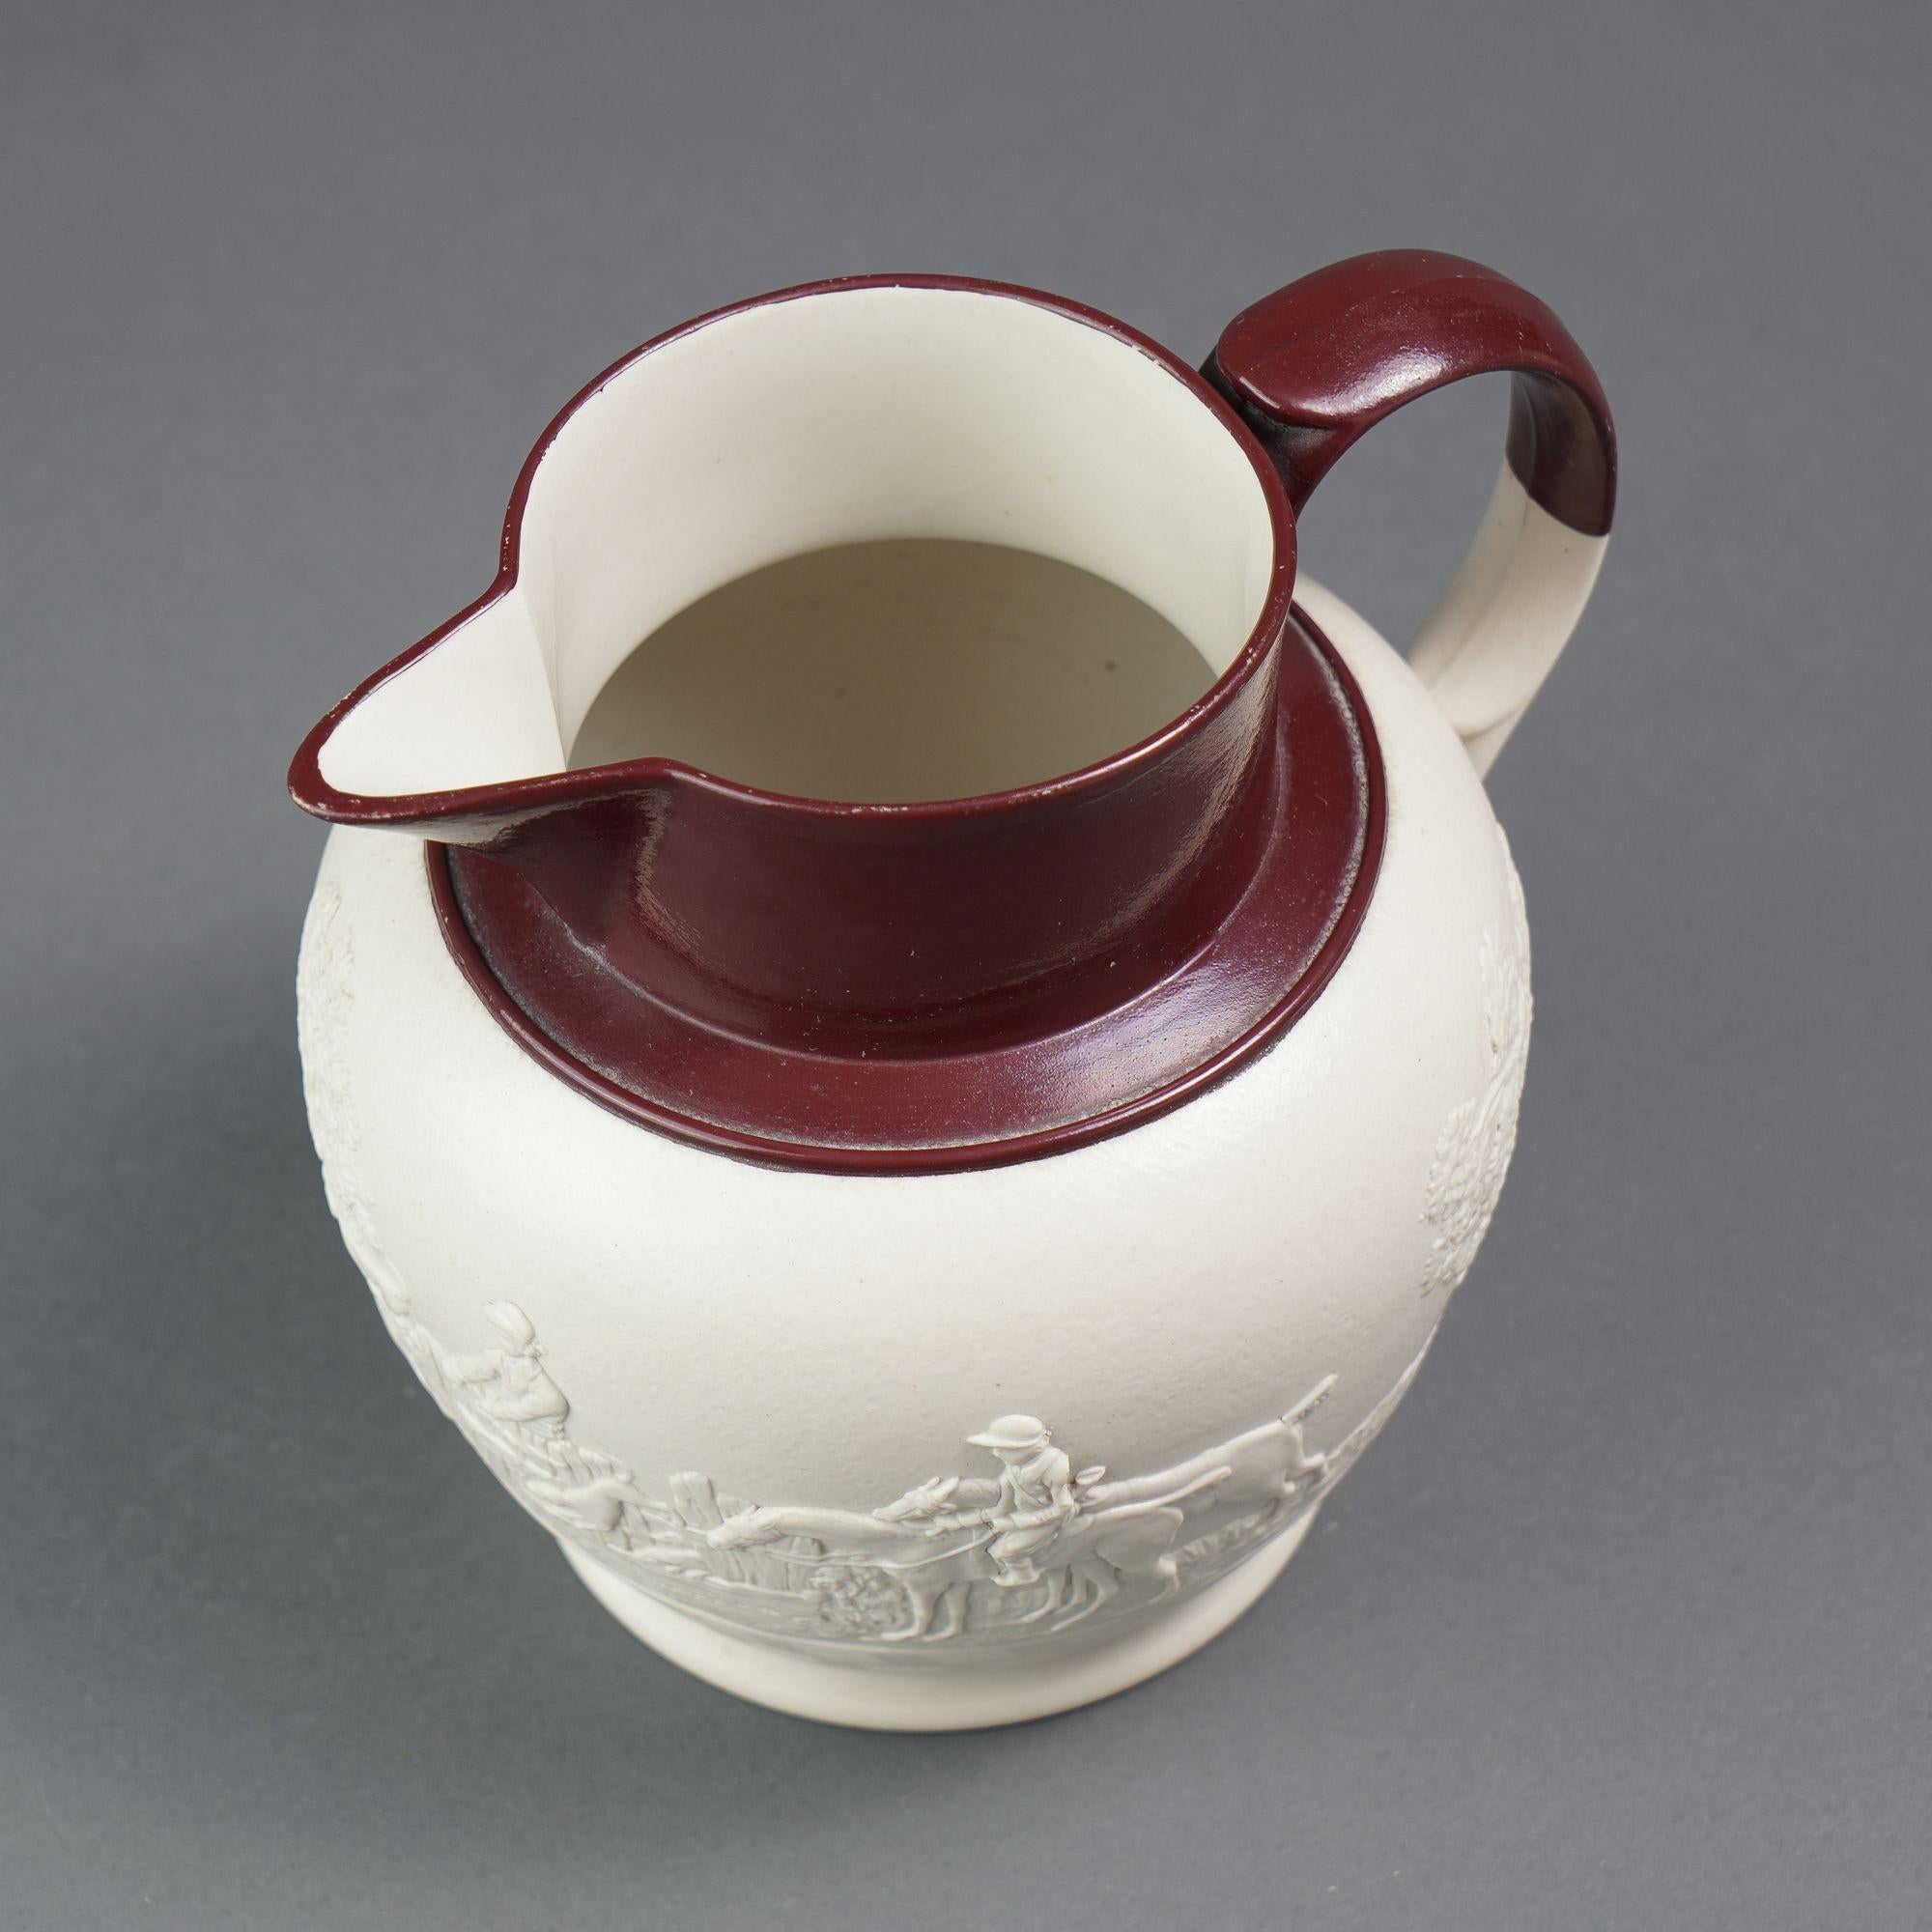 English stoneware hunt jug by Spode, c. 1810 For Sale 2